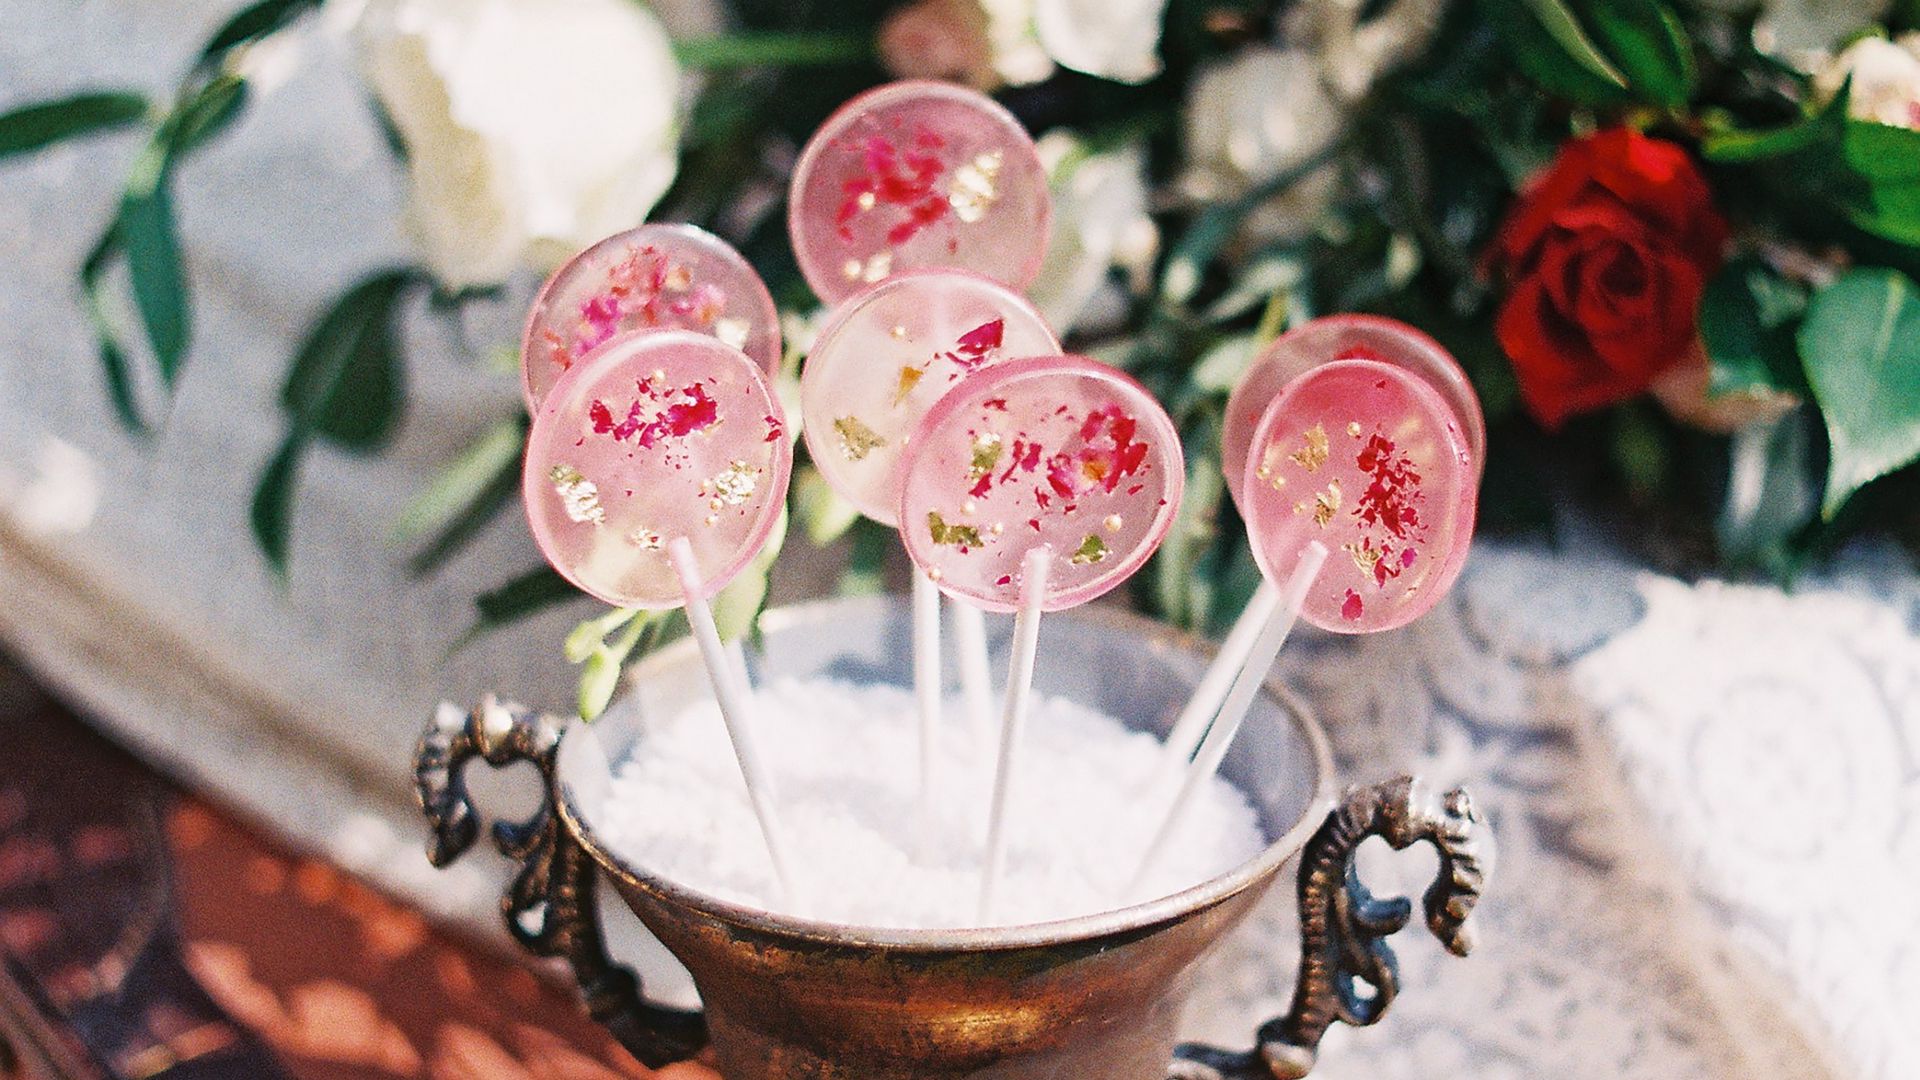 Download wallpaper 1920x1080 lollipops, candy, pink, flowers, cup full hd,  hdtv, fhd, 1080p hd background